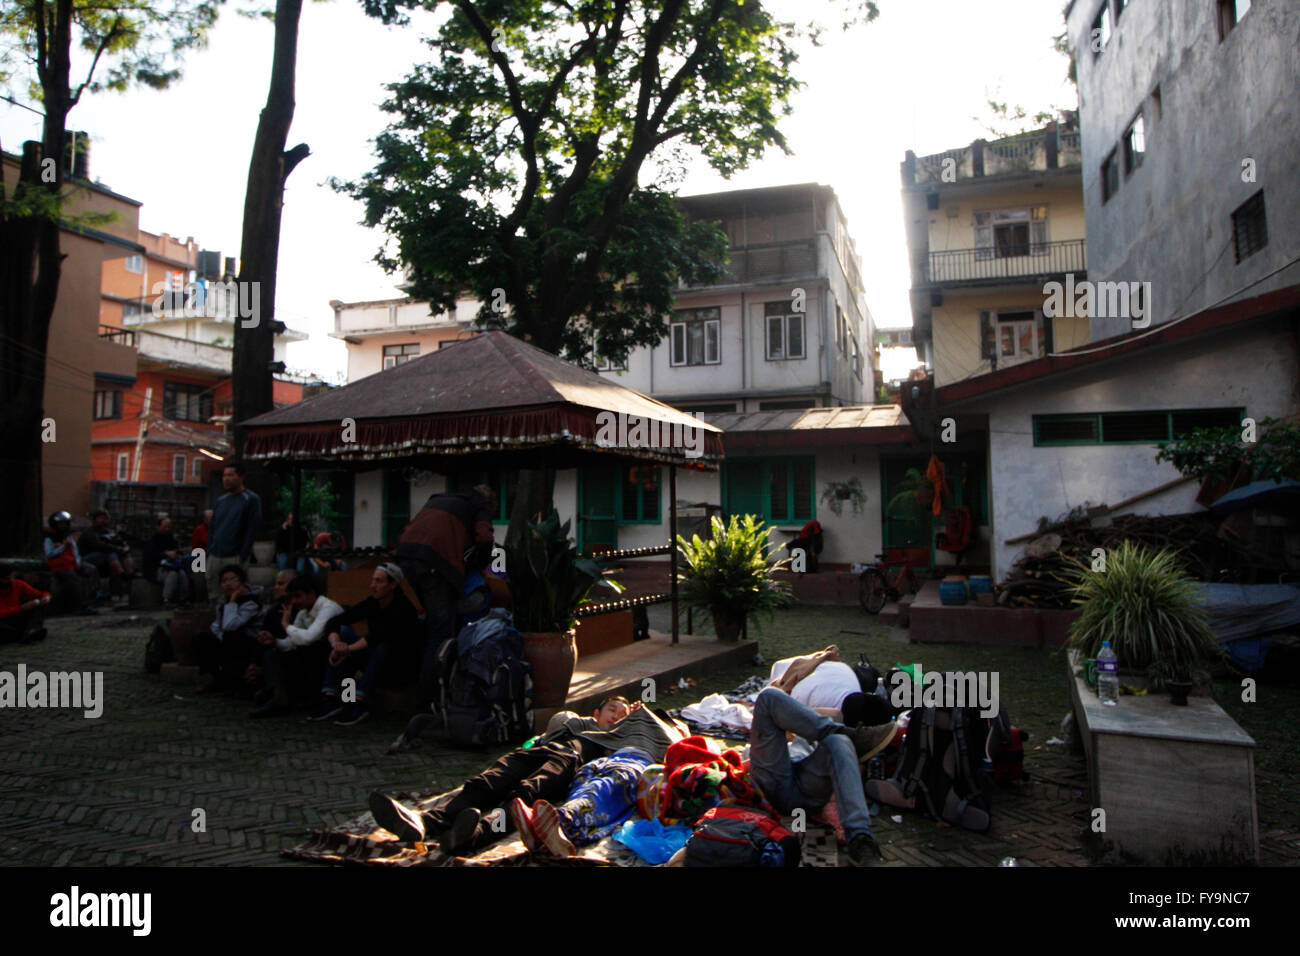 On April 25th 2015, Nepal was struck by huge earthquake. Image taken 2 hours after the first quake. Tourists in hotel courtyard Stock Photo